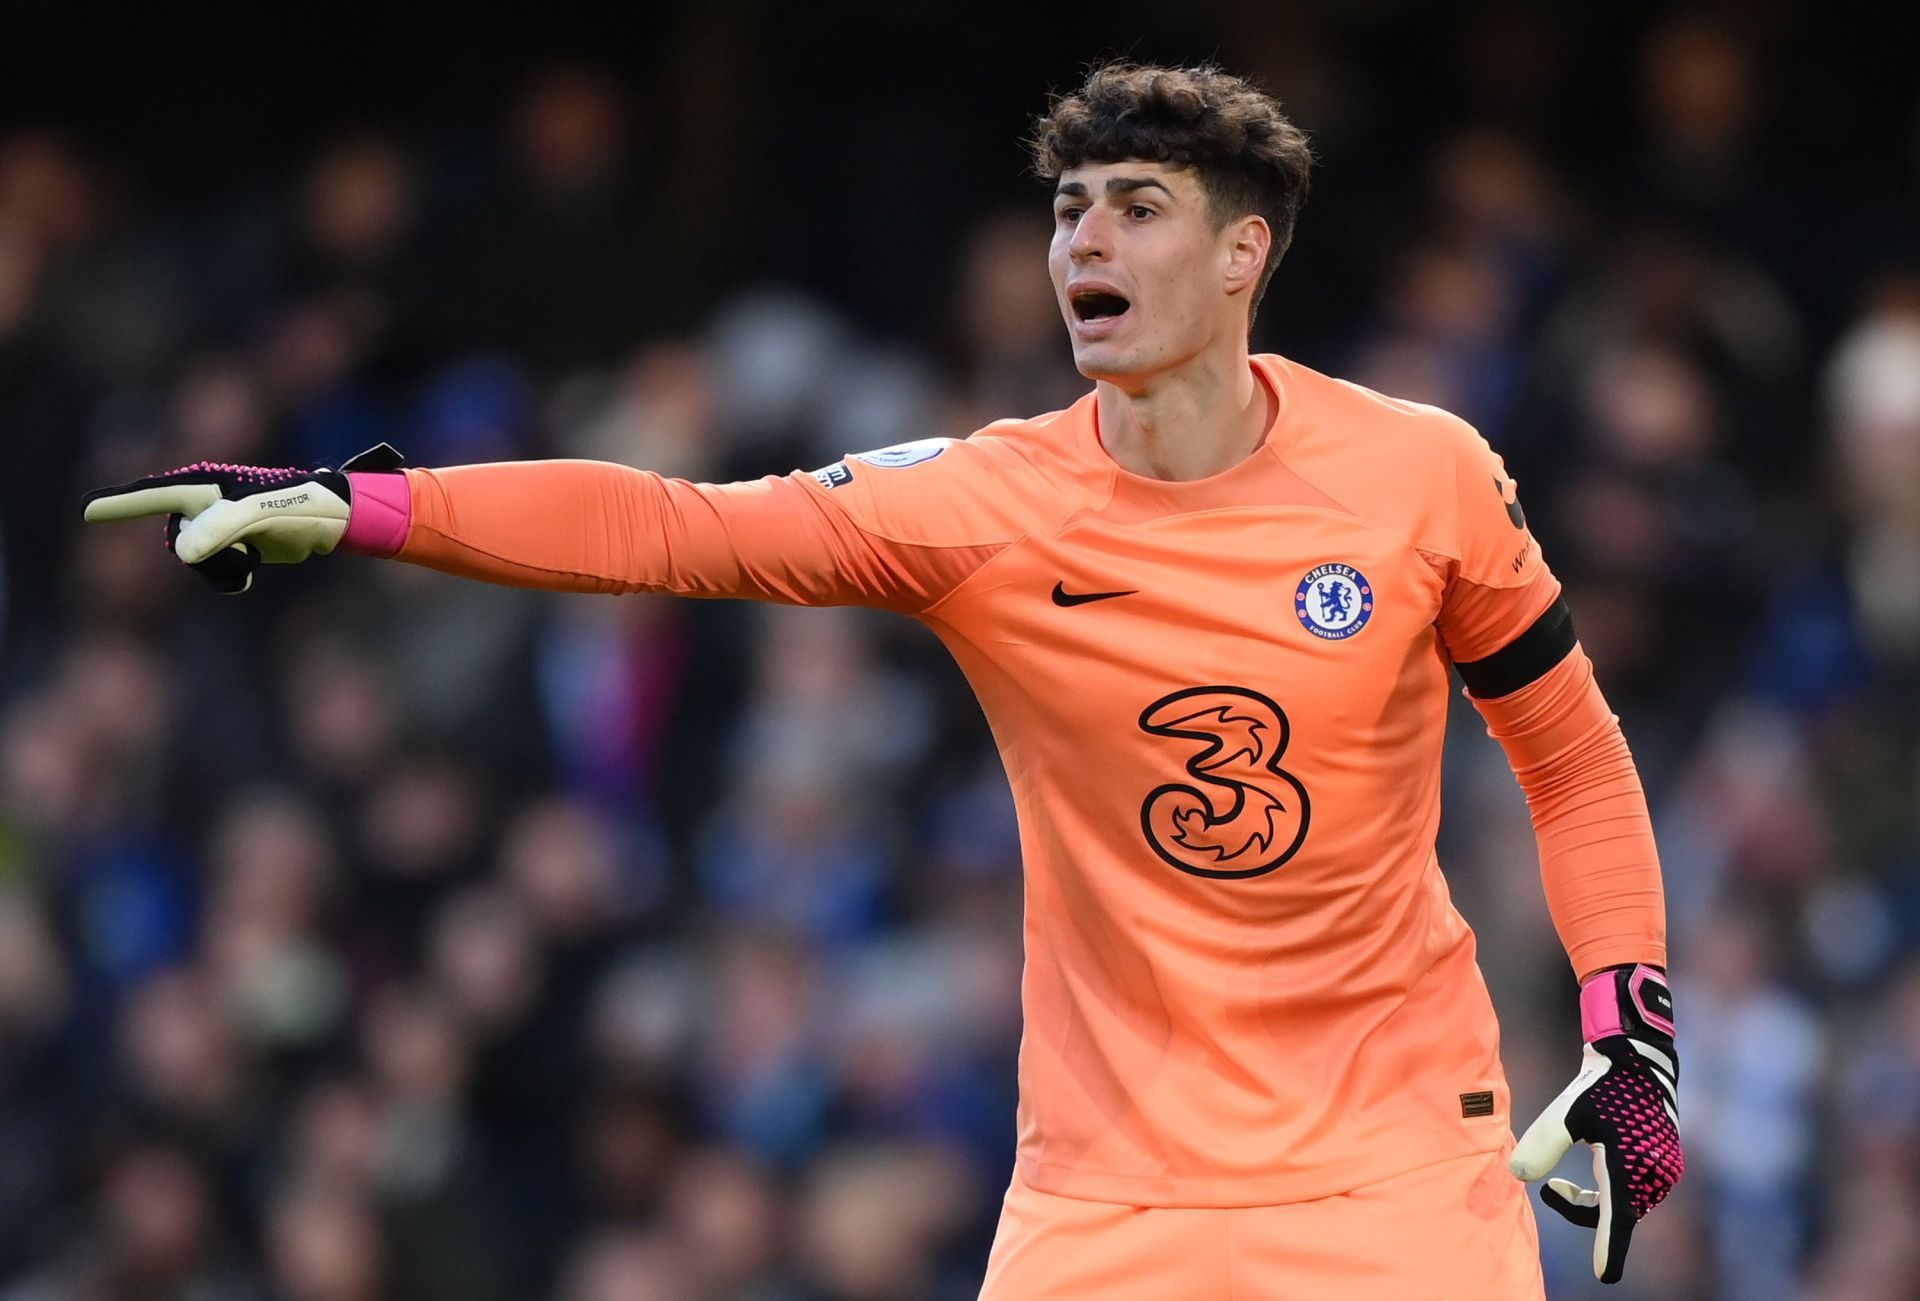 Kepa has kept two clean sheets in his last two games for the Blues